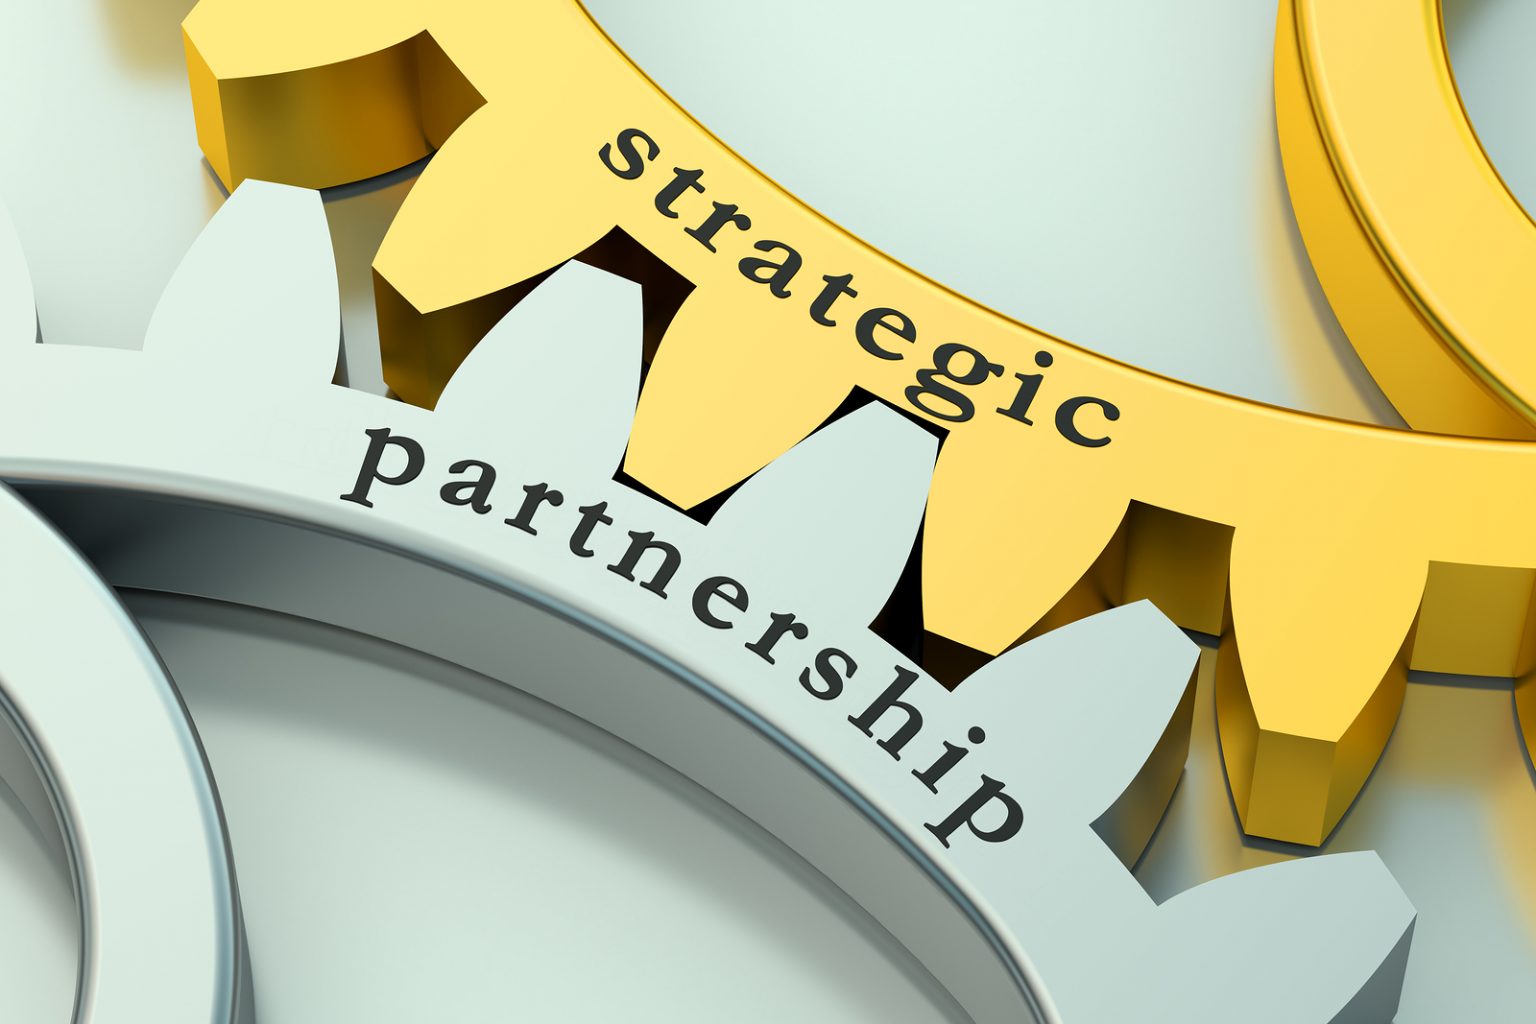 How to Structure a Strategic Partnership